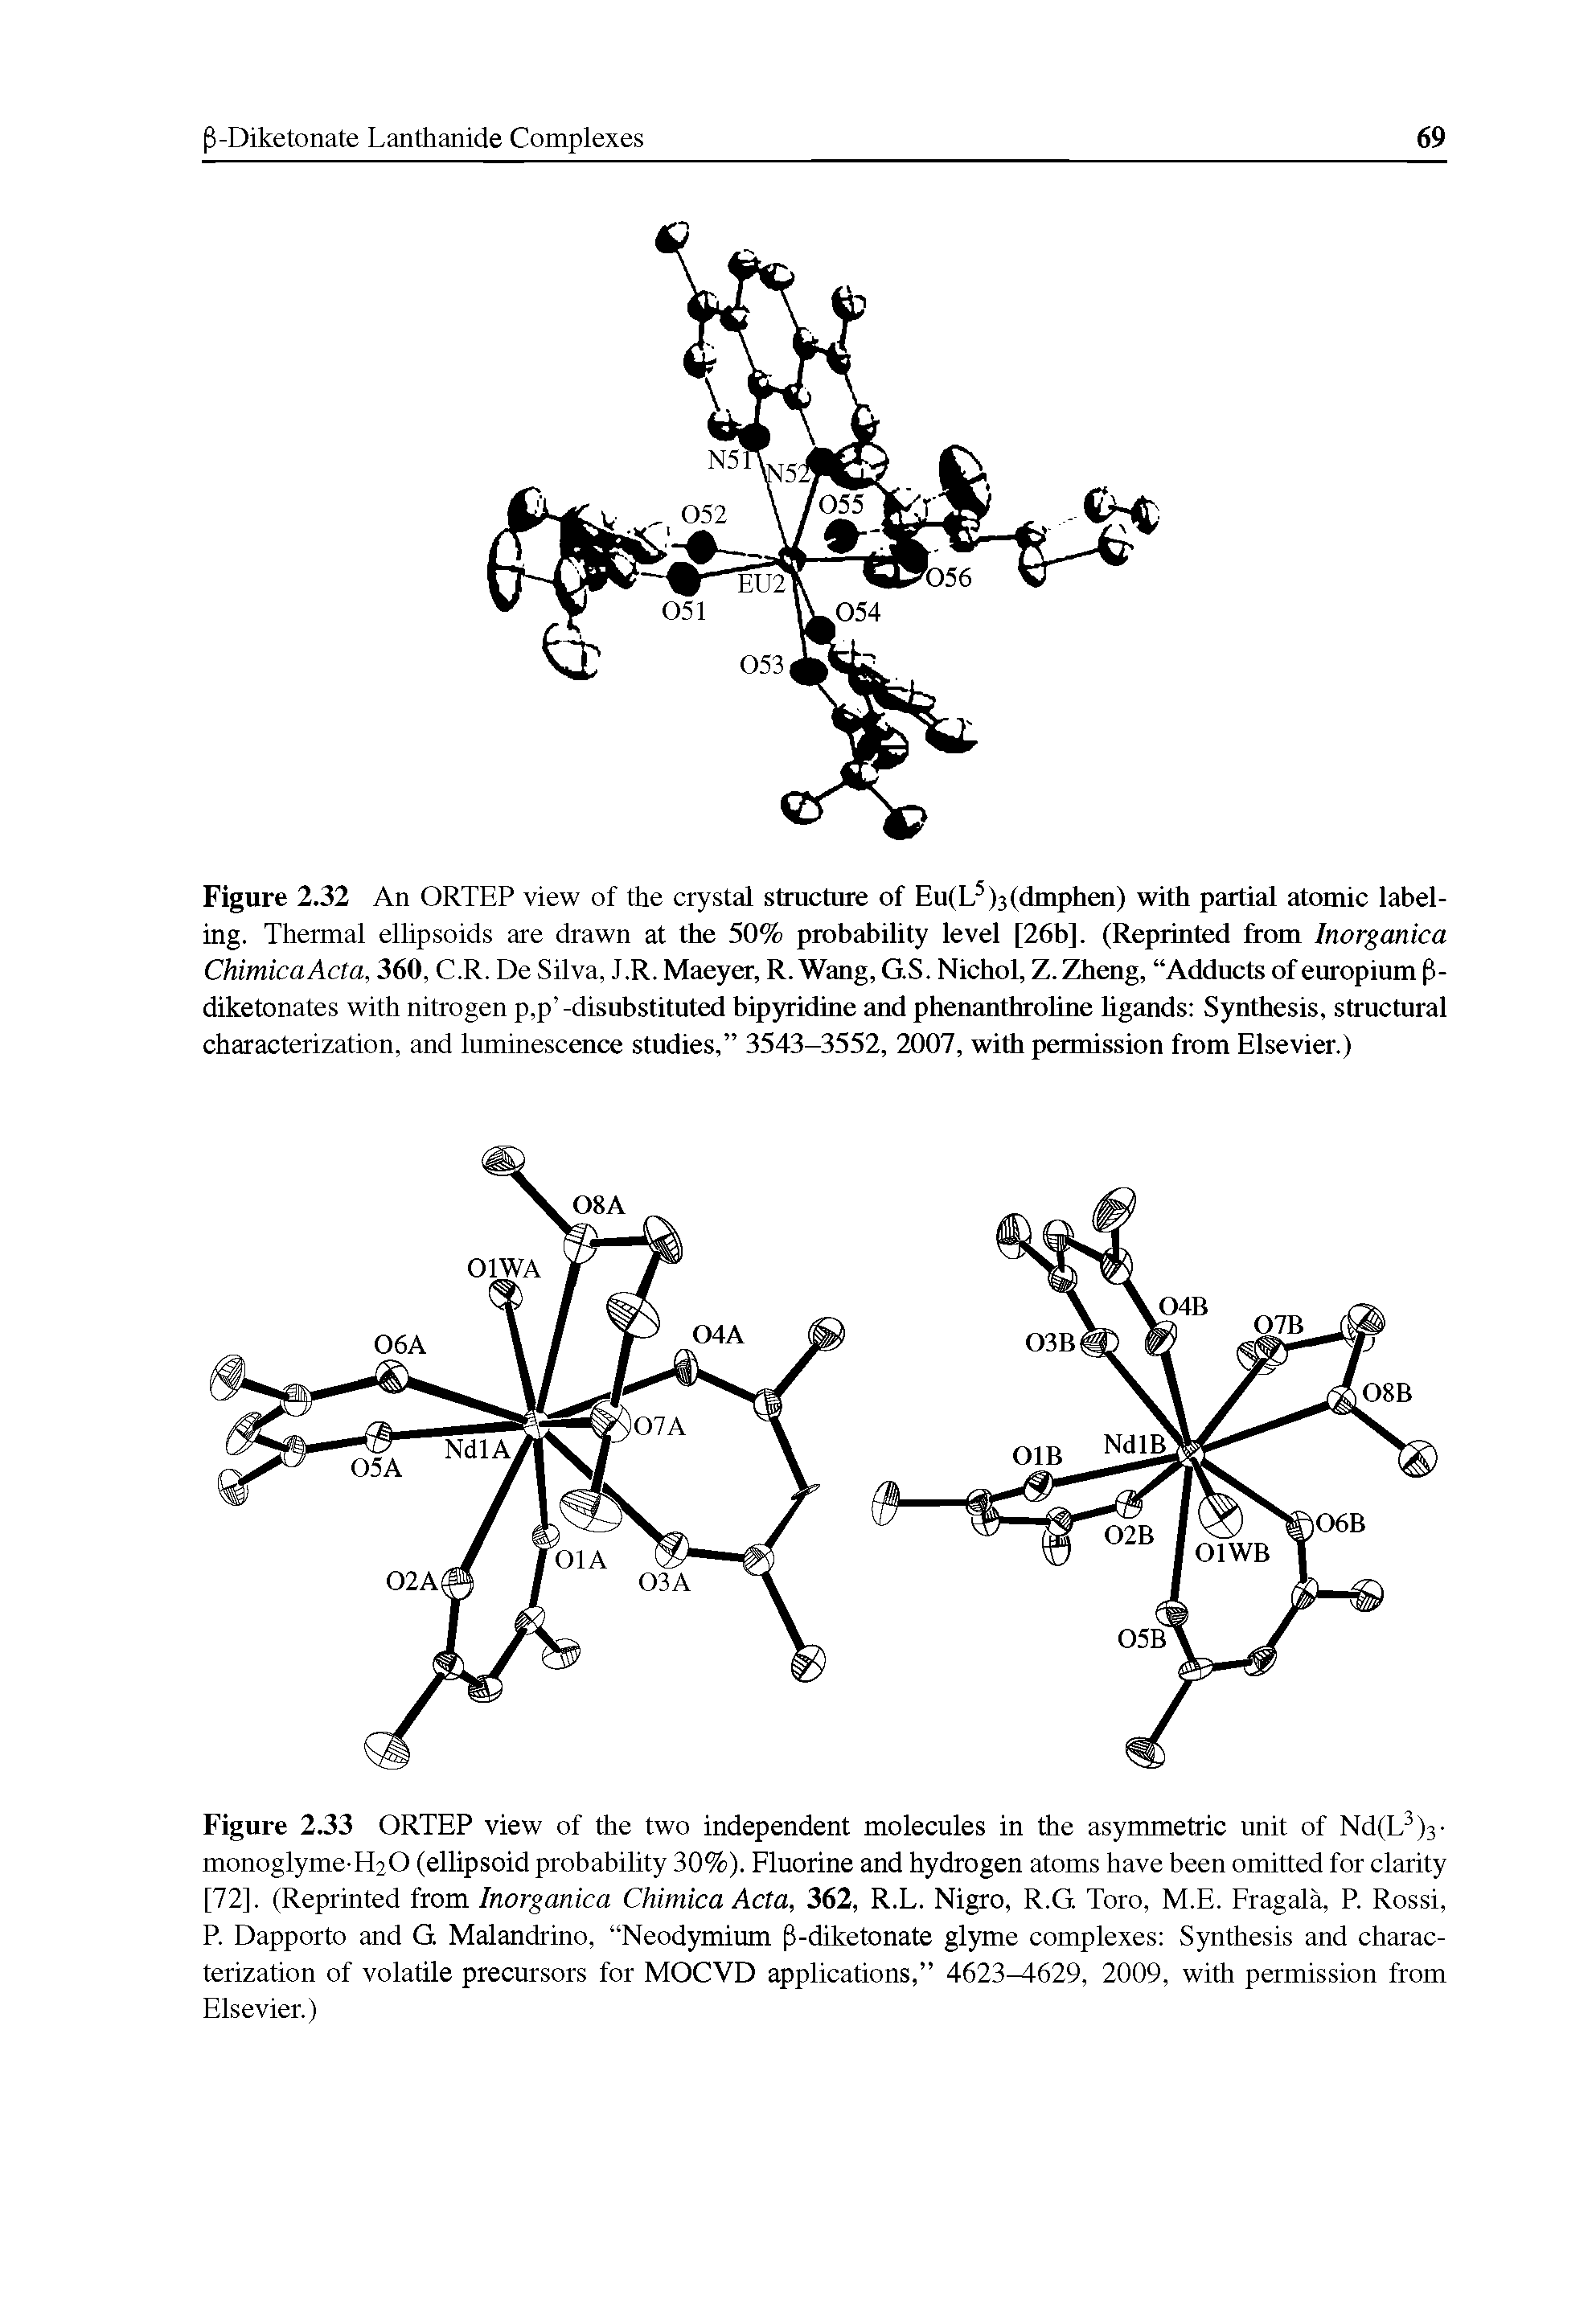 Figure 2.33 ORTEP view of the two independent molecules in the asymmetric unit of Nd(L )3-monoglyme-HiO (ellipsoid probability 30%). Fluorine and hydrogen atoms have been omitted for clarity [72]. (Reprinted from Inorganica ChimicaActa, 362, R.L. Nigro, R.G. Toro, M.E. Fragala, P. Rossi, P. Dapporto and G. Malandrino, Neodymium -diketonate glyme complexes Synthesis and characterization of volatile precursors for MOCVD applications, 4623 629, 2009, with permission from Elsevier.)...